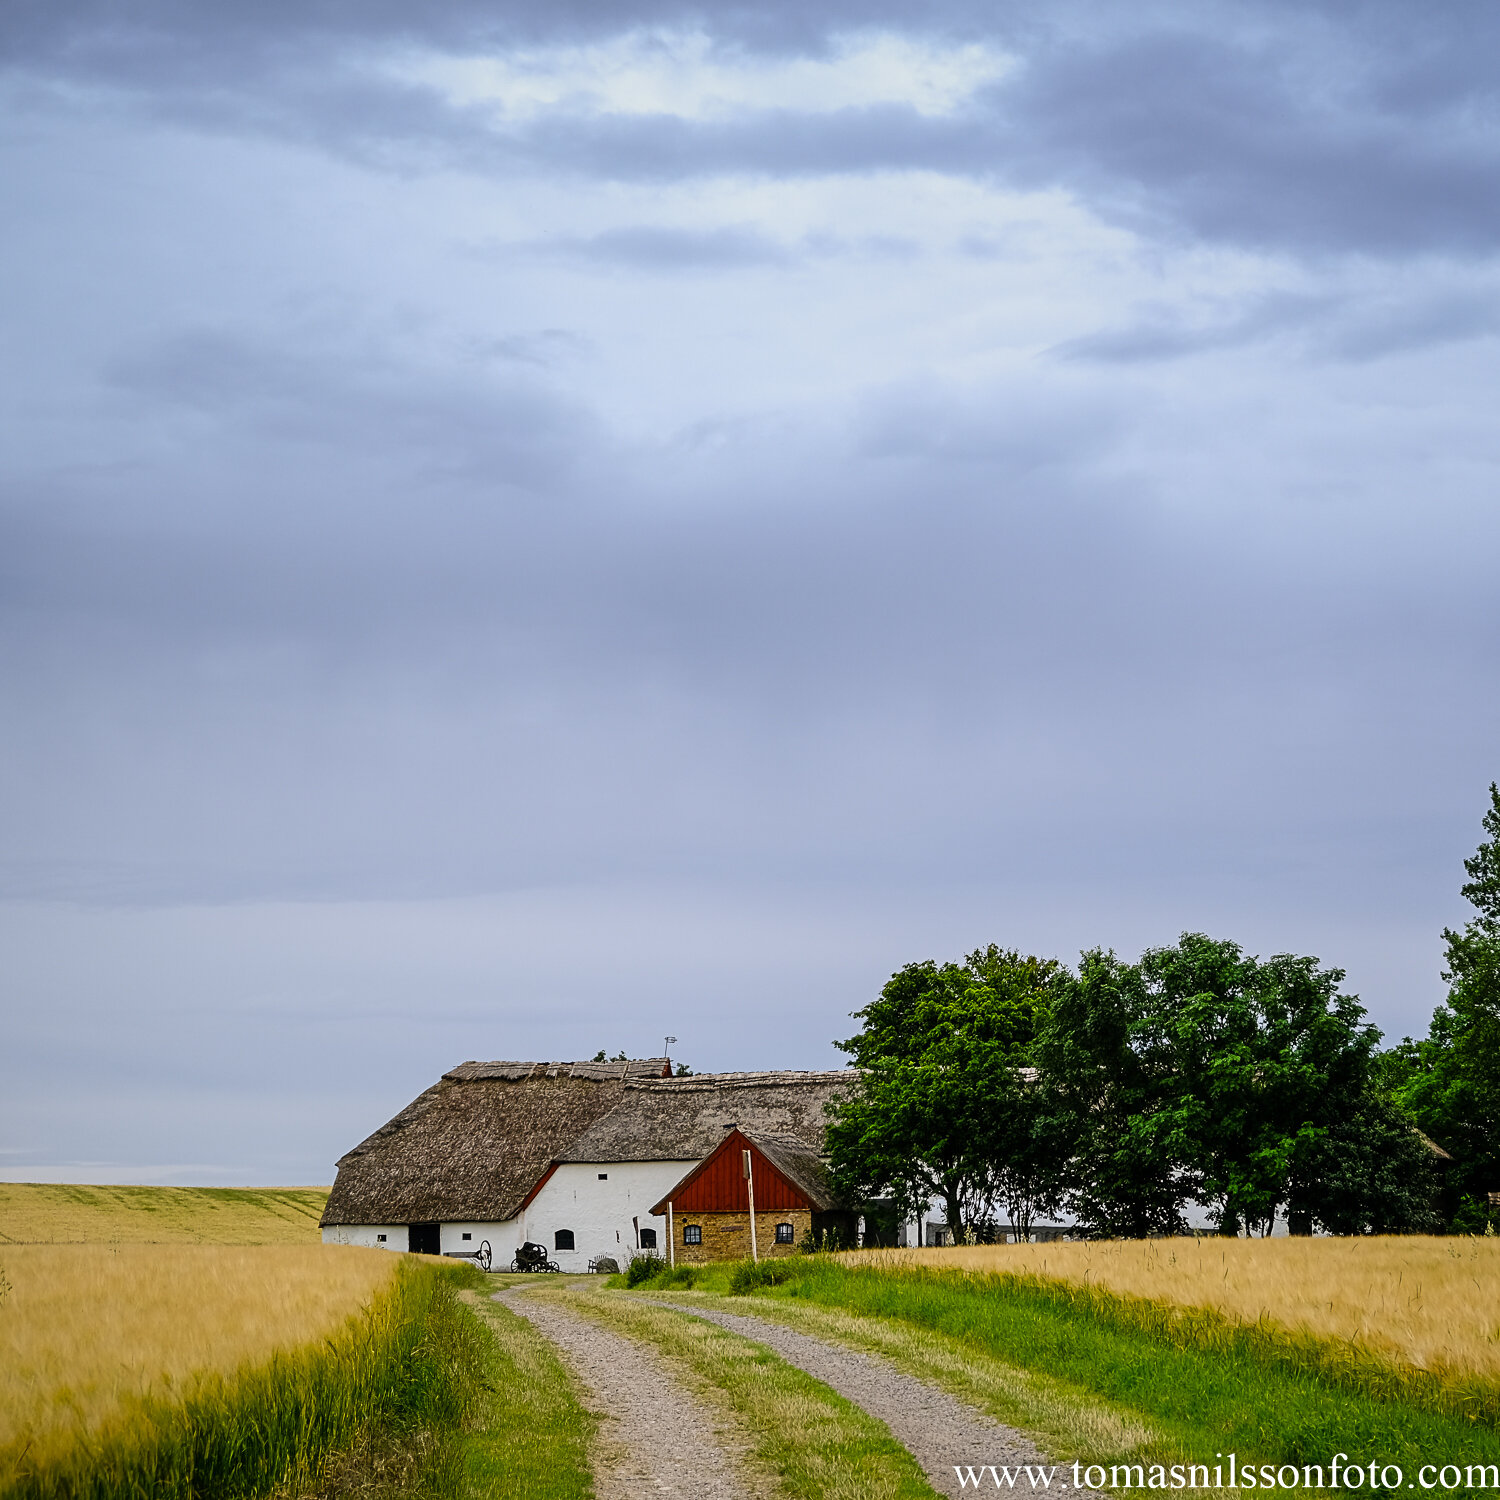 Day 211 - July 29: The Old Farm